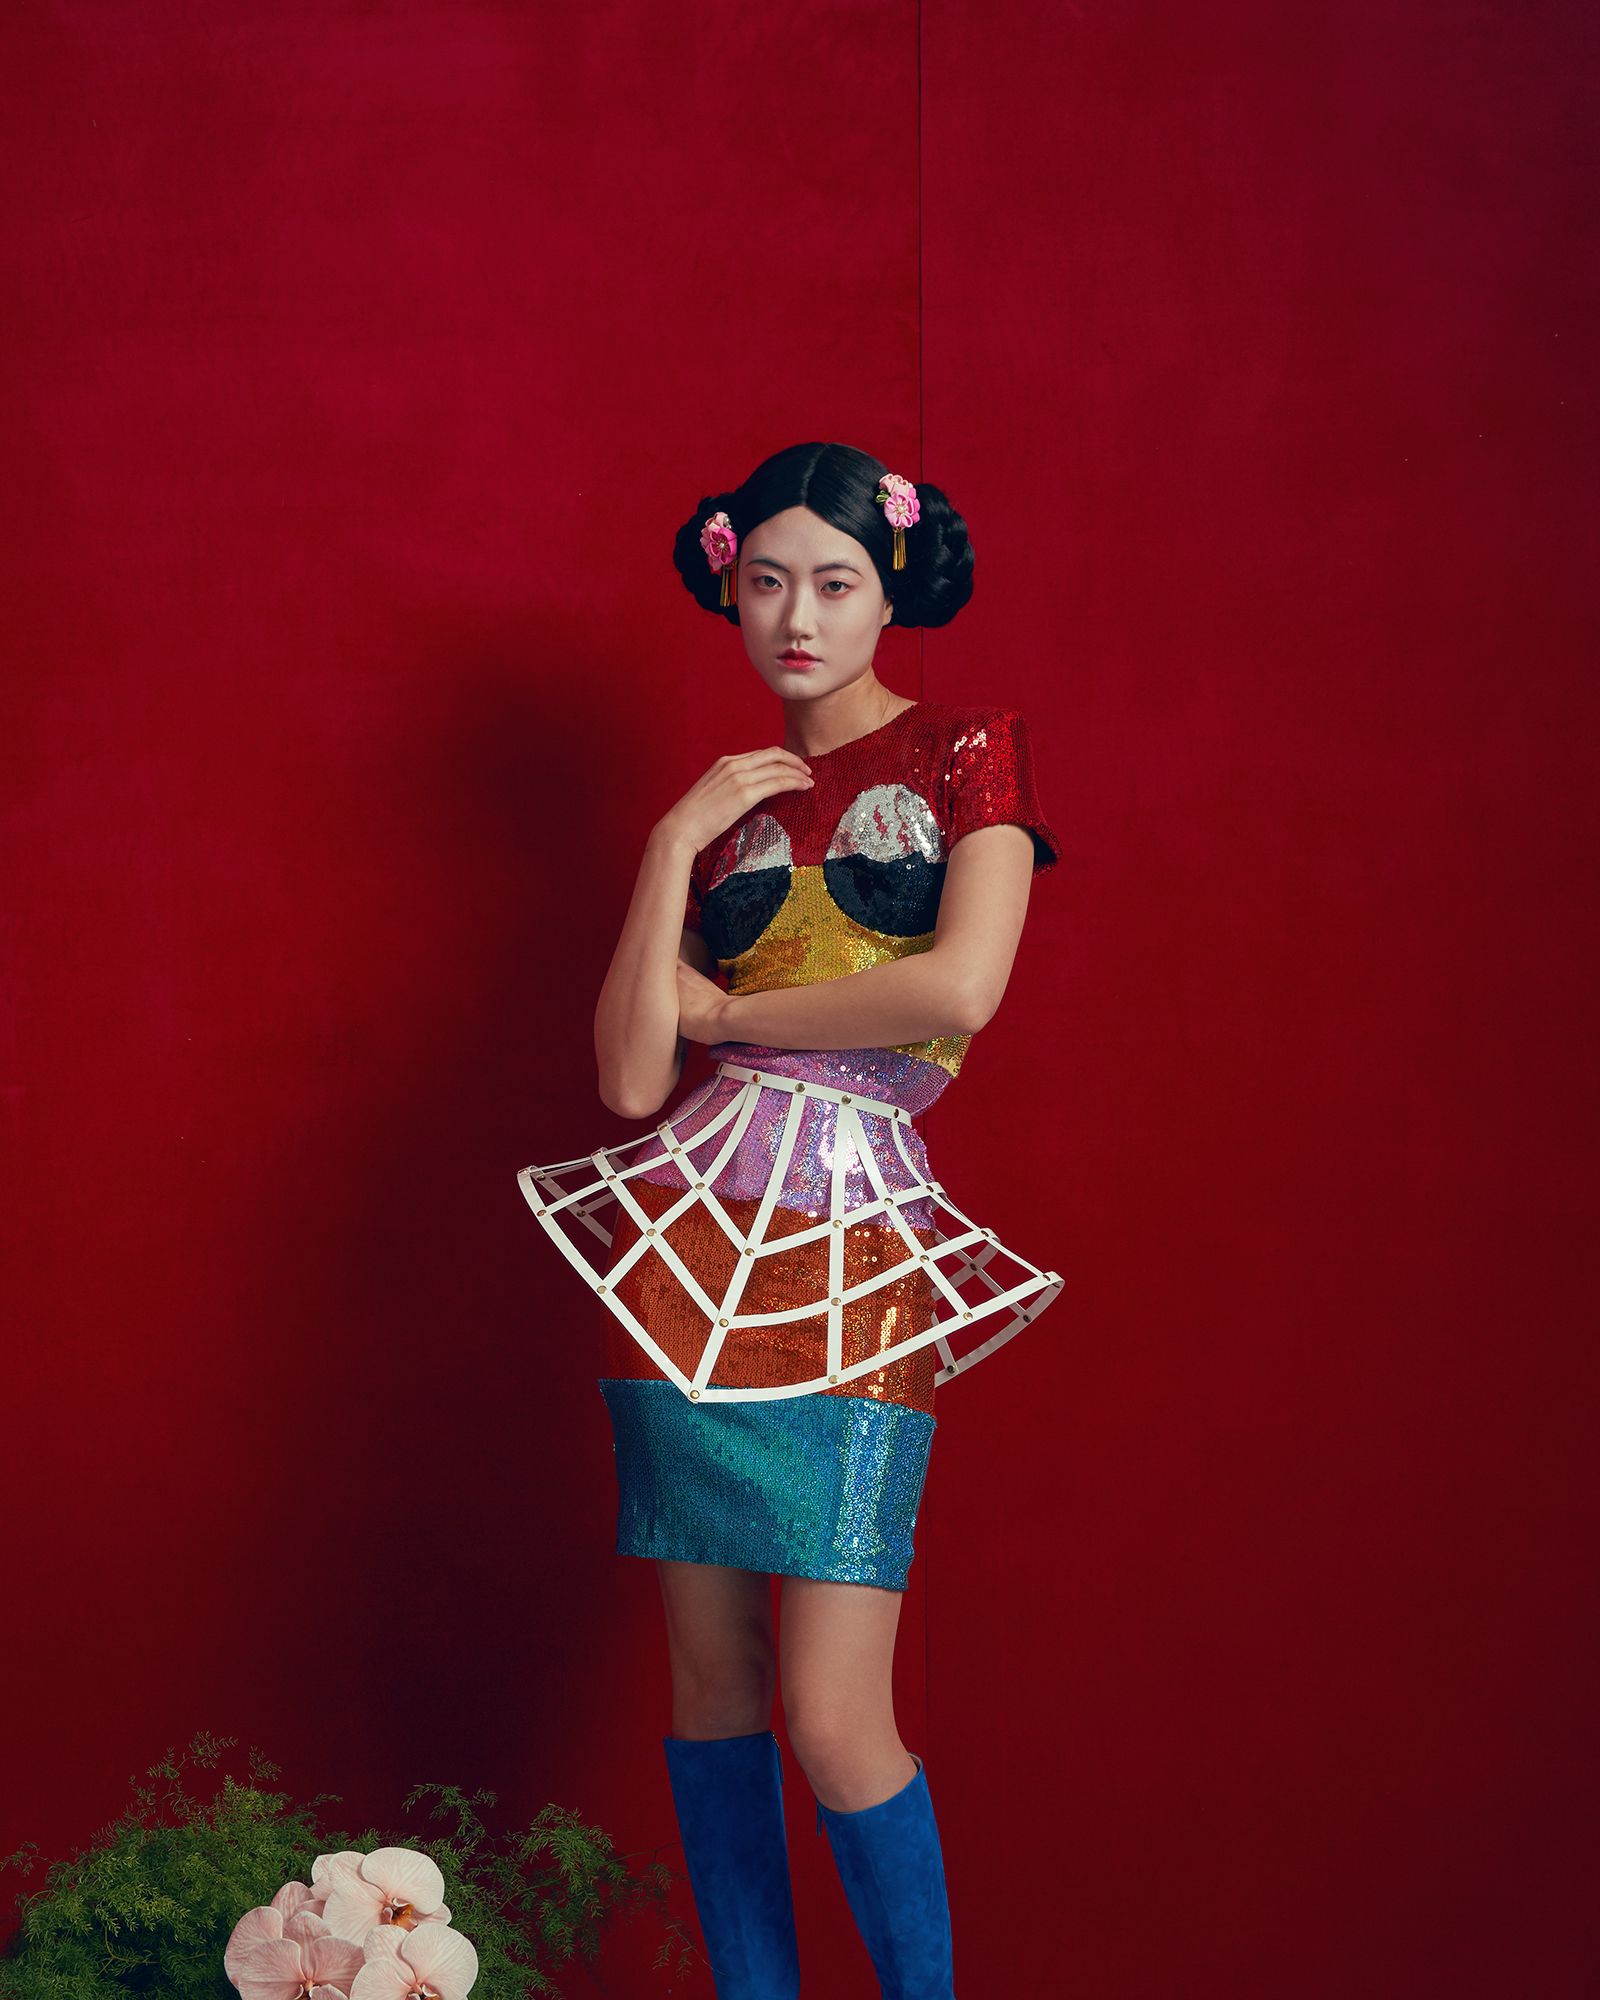 © Michelle Watt - Image from the Lunar Geisha photography project